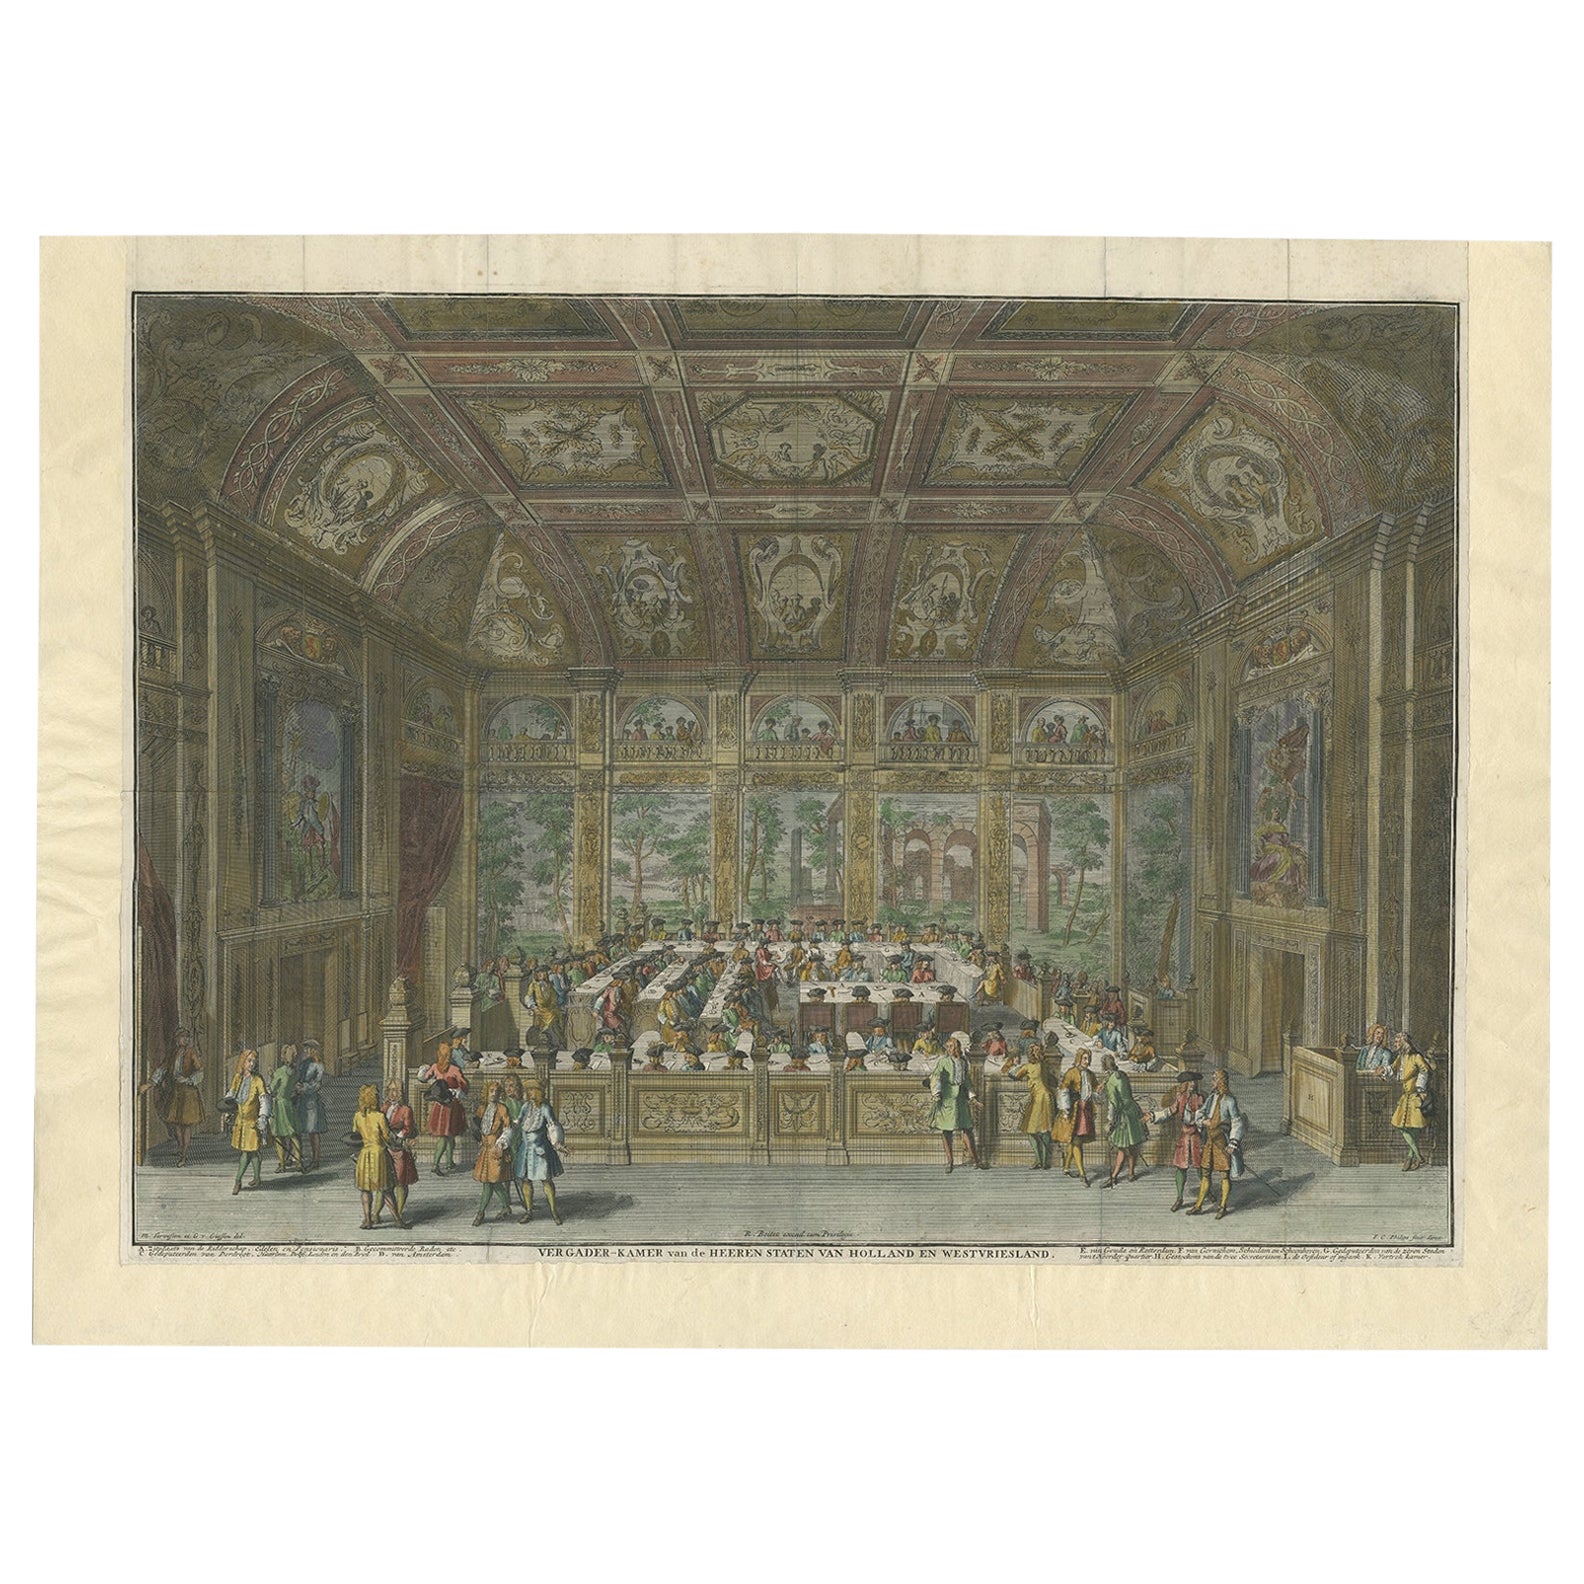 Antique Print of the Dutch Senate Meeting Room in the Hague, 1730